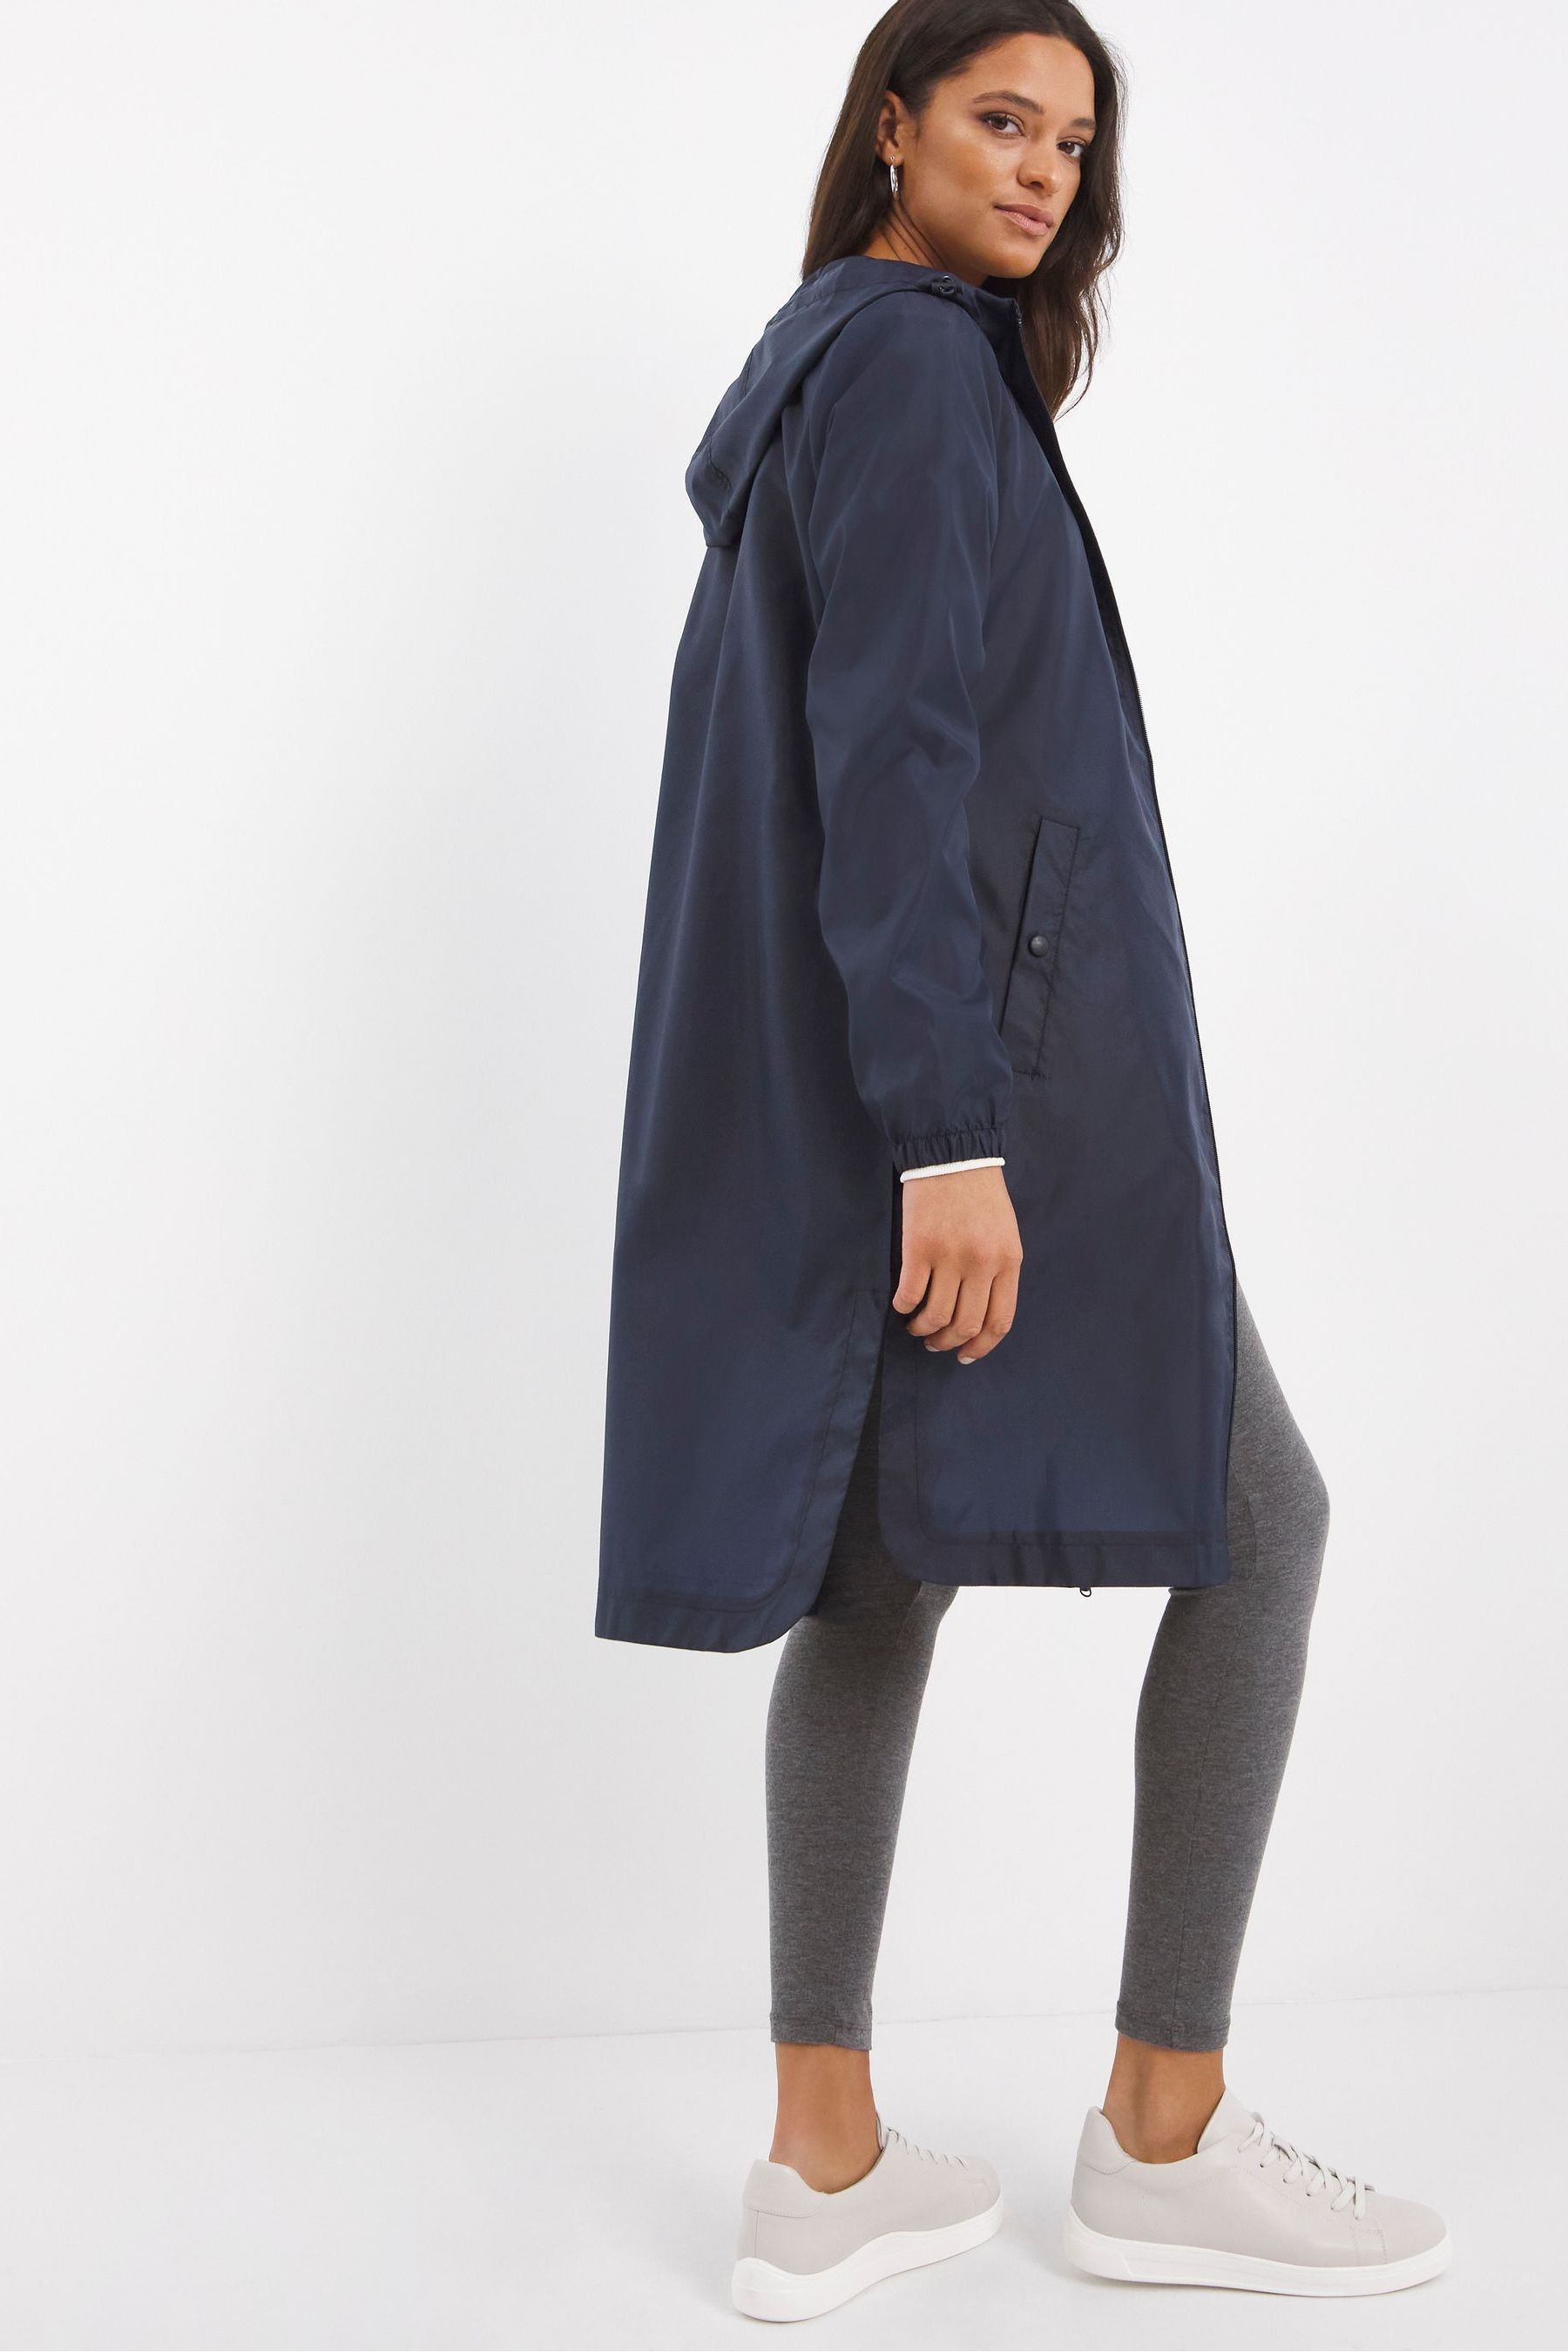 Buy JD Williams Navy Blue Longline Packaway Trench Jacket from the Next ...